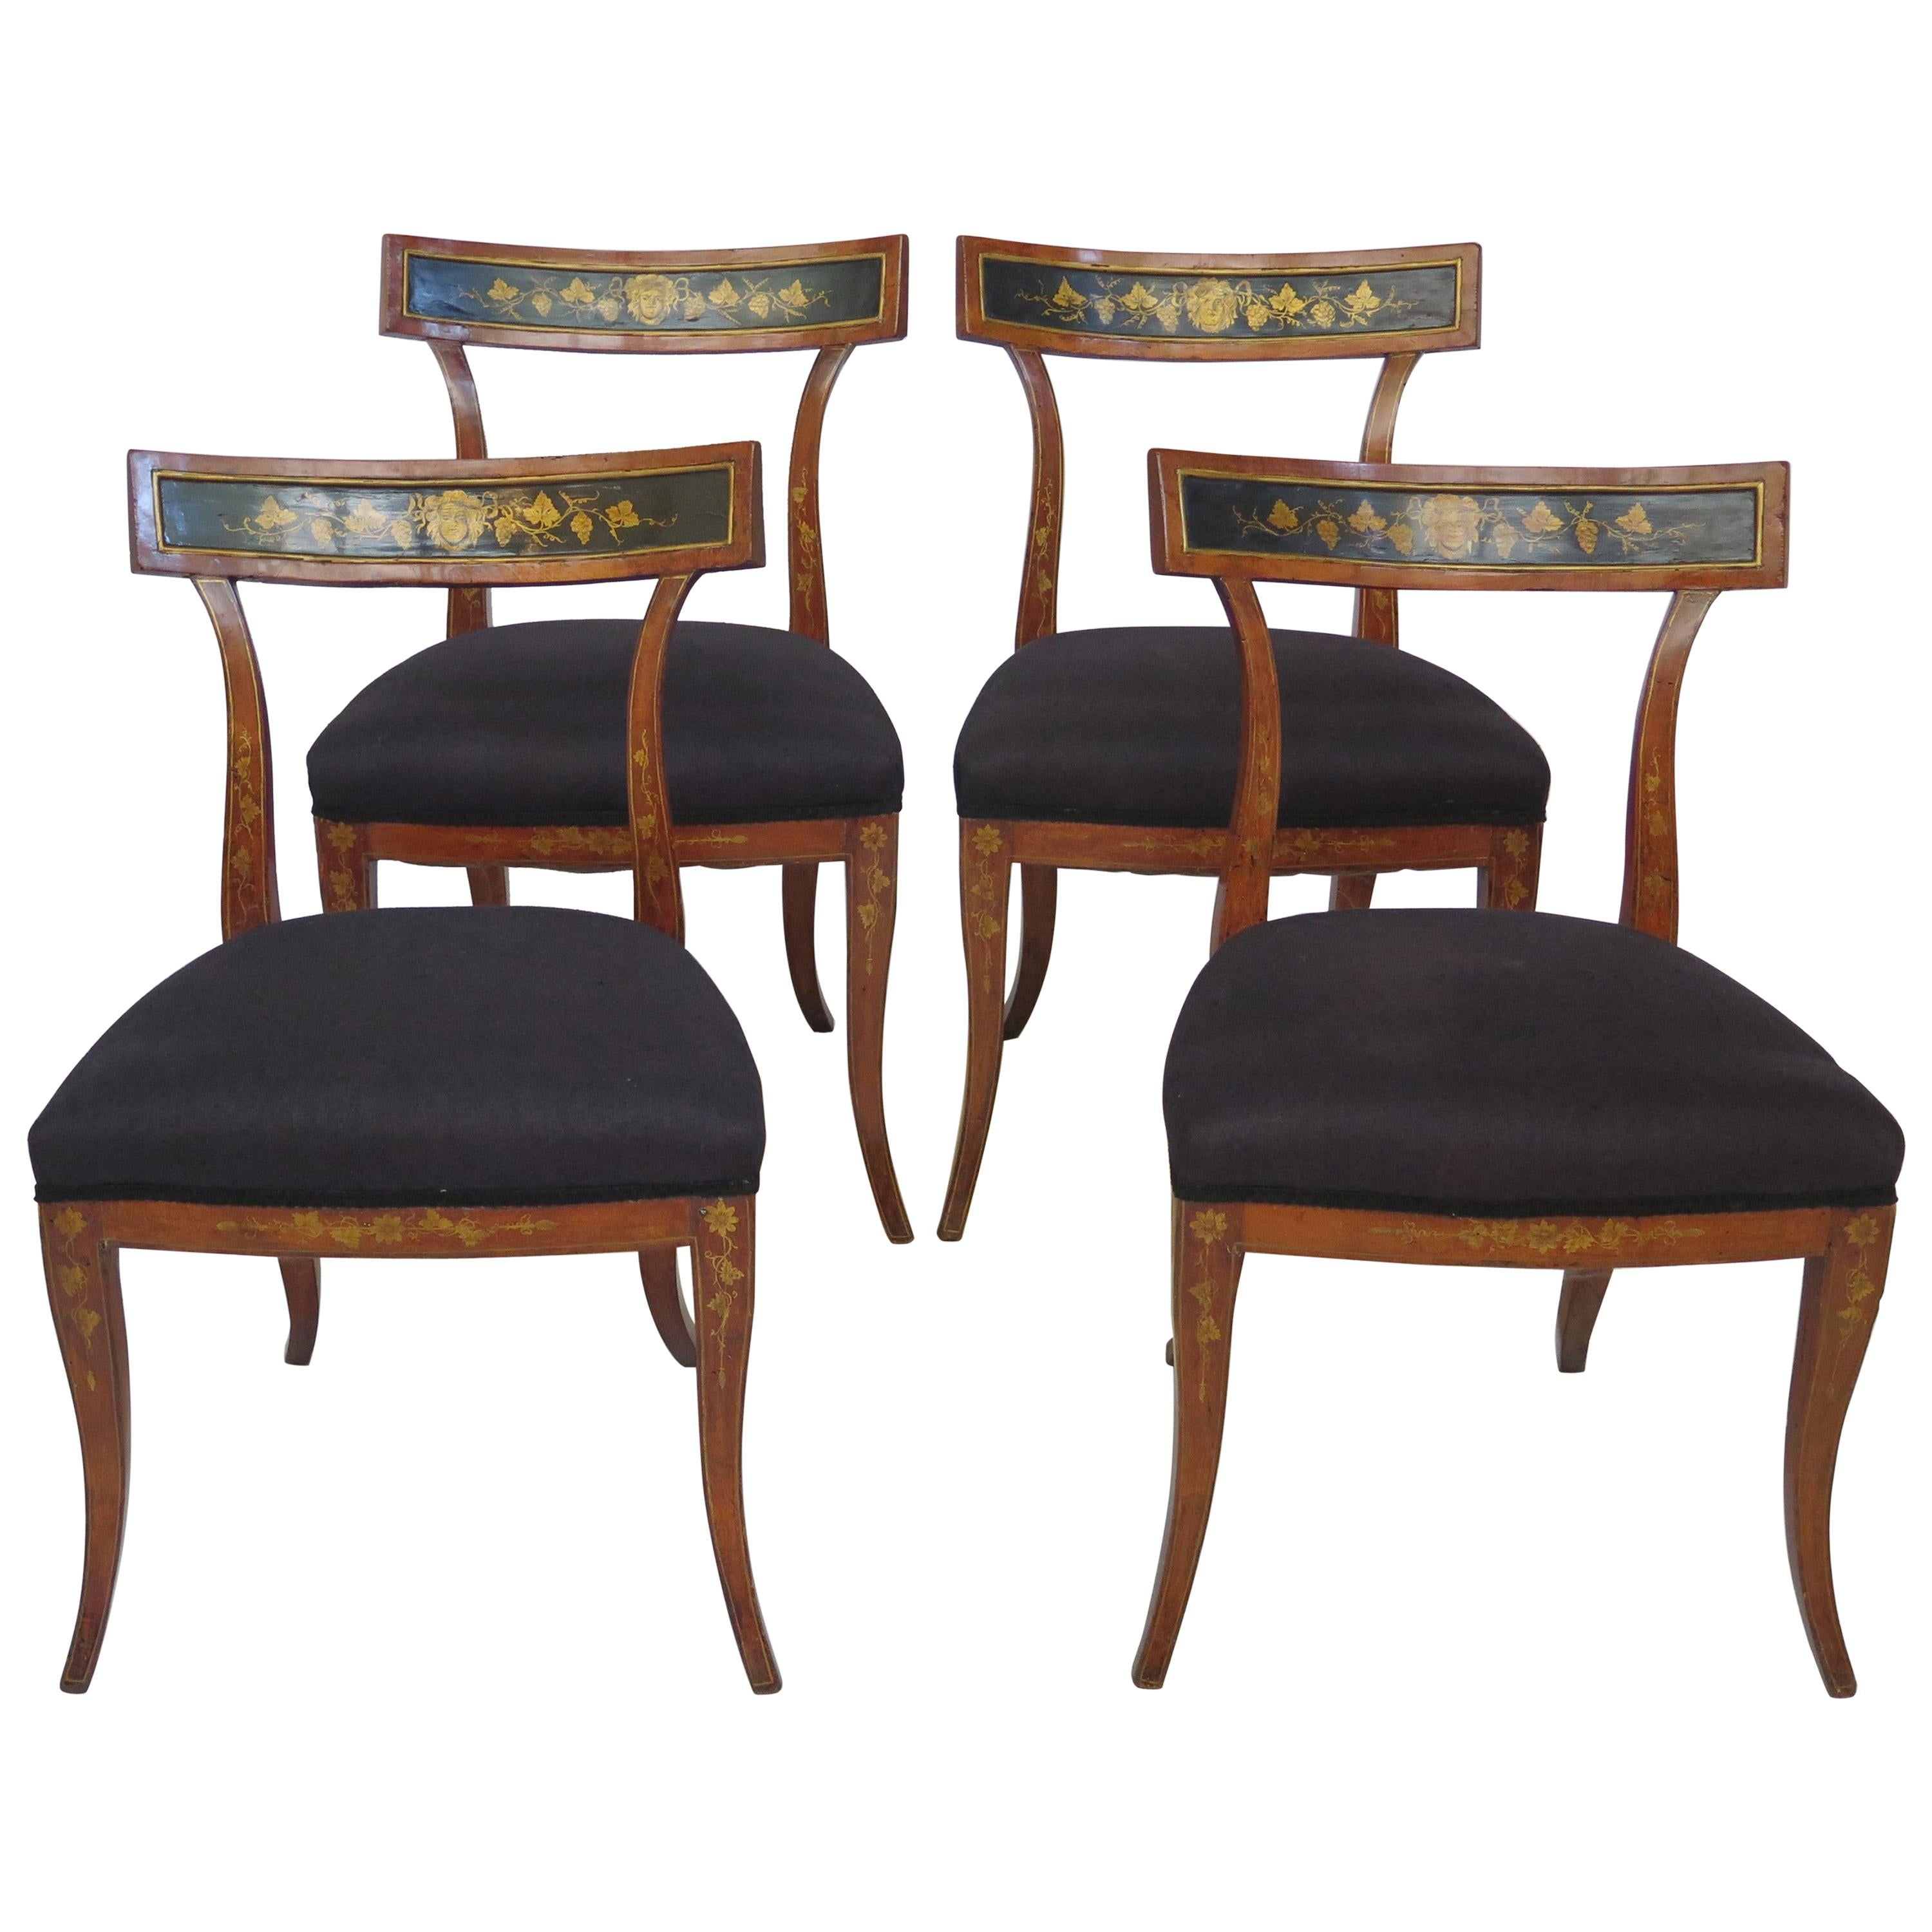 Set of Four English Regency Fruitwood Side Chairs, Chinoiserie Decorated